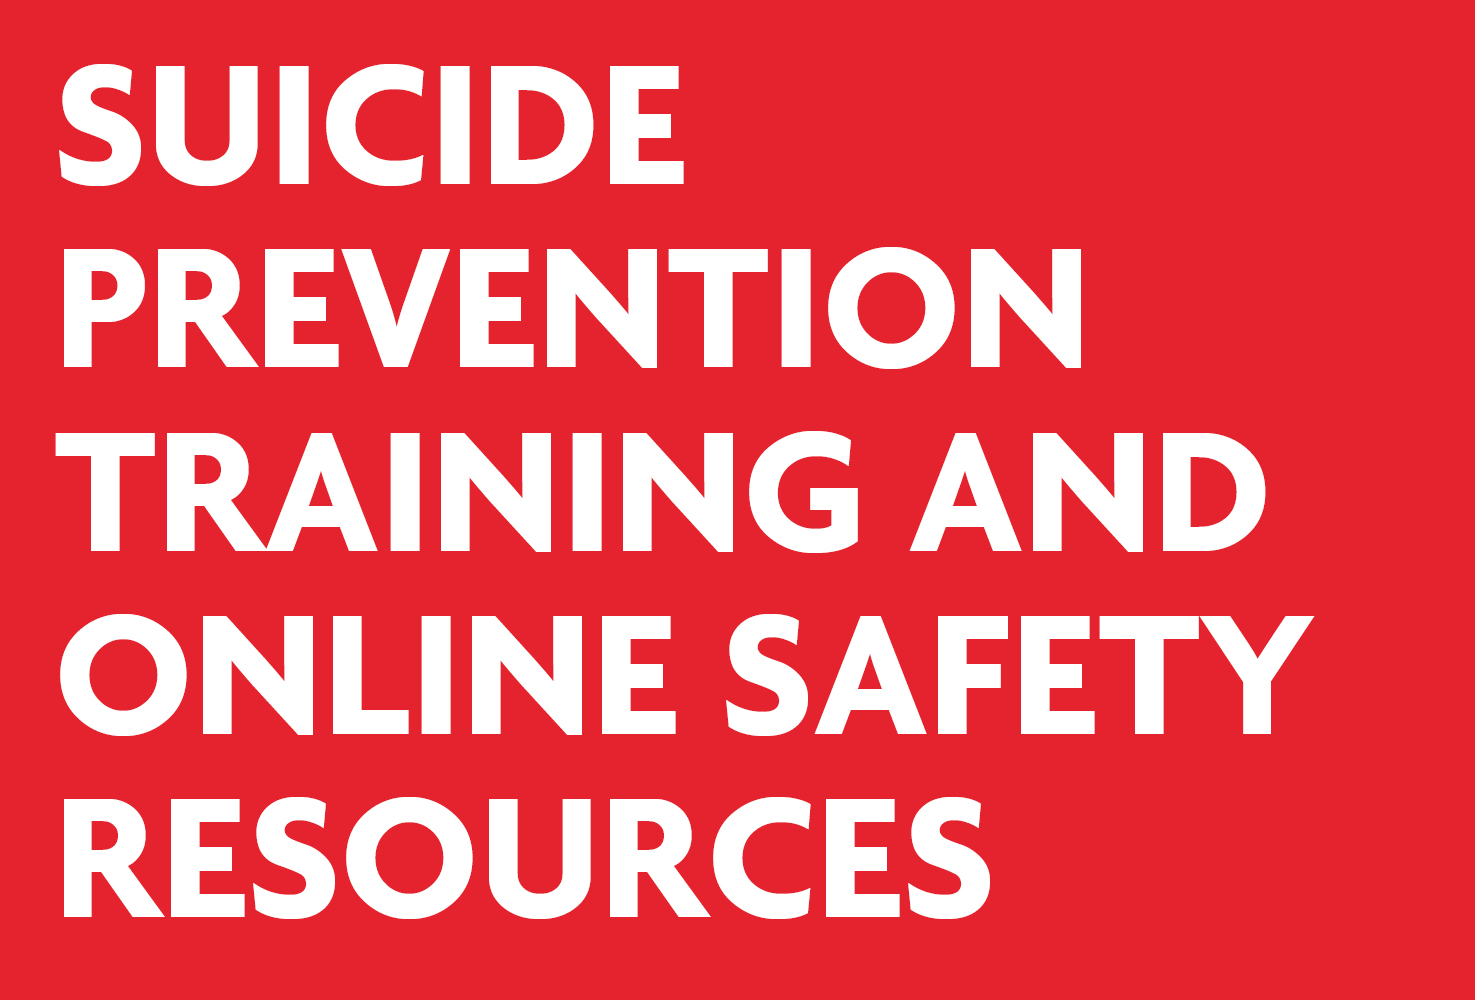 Suicide Prevention Training and Online Safety Resources